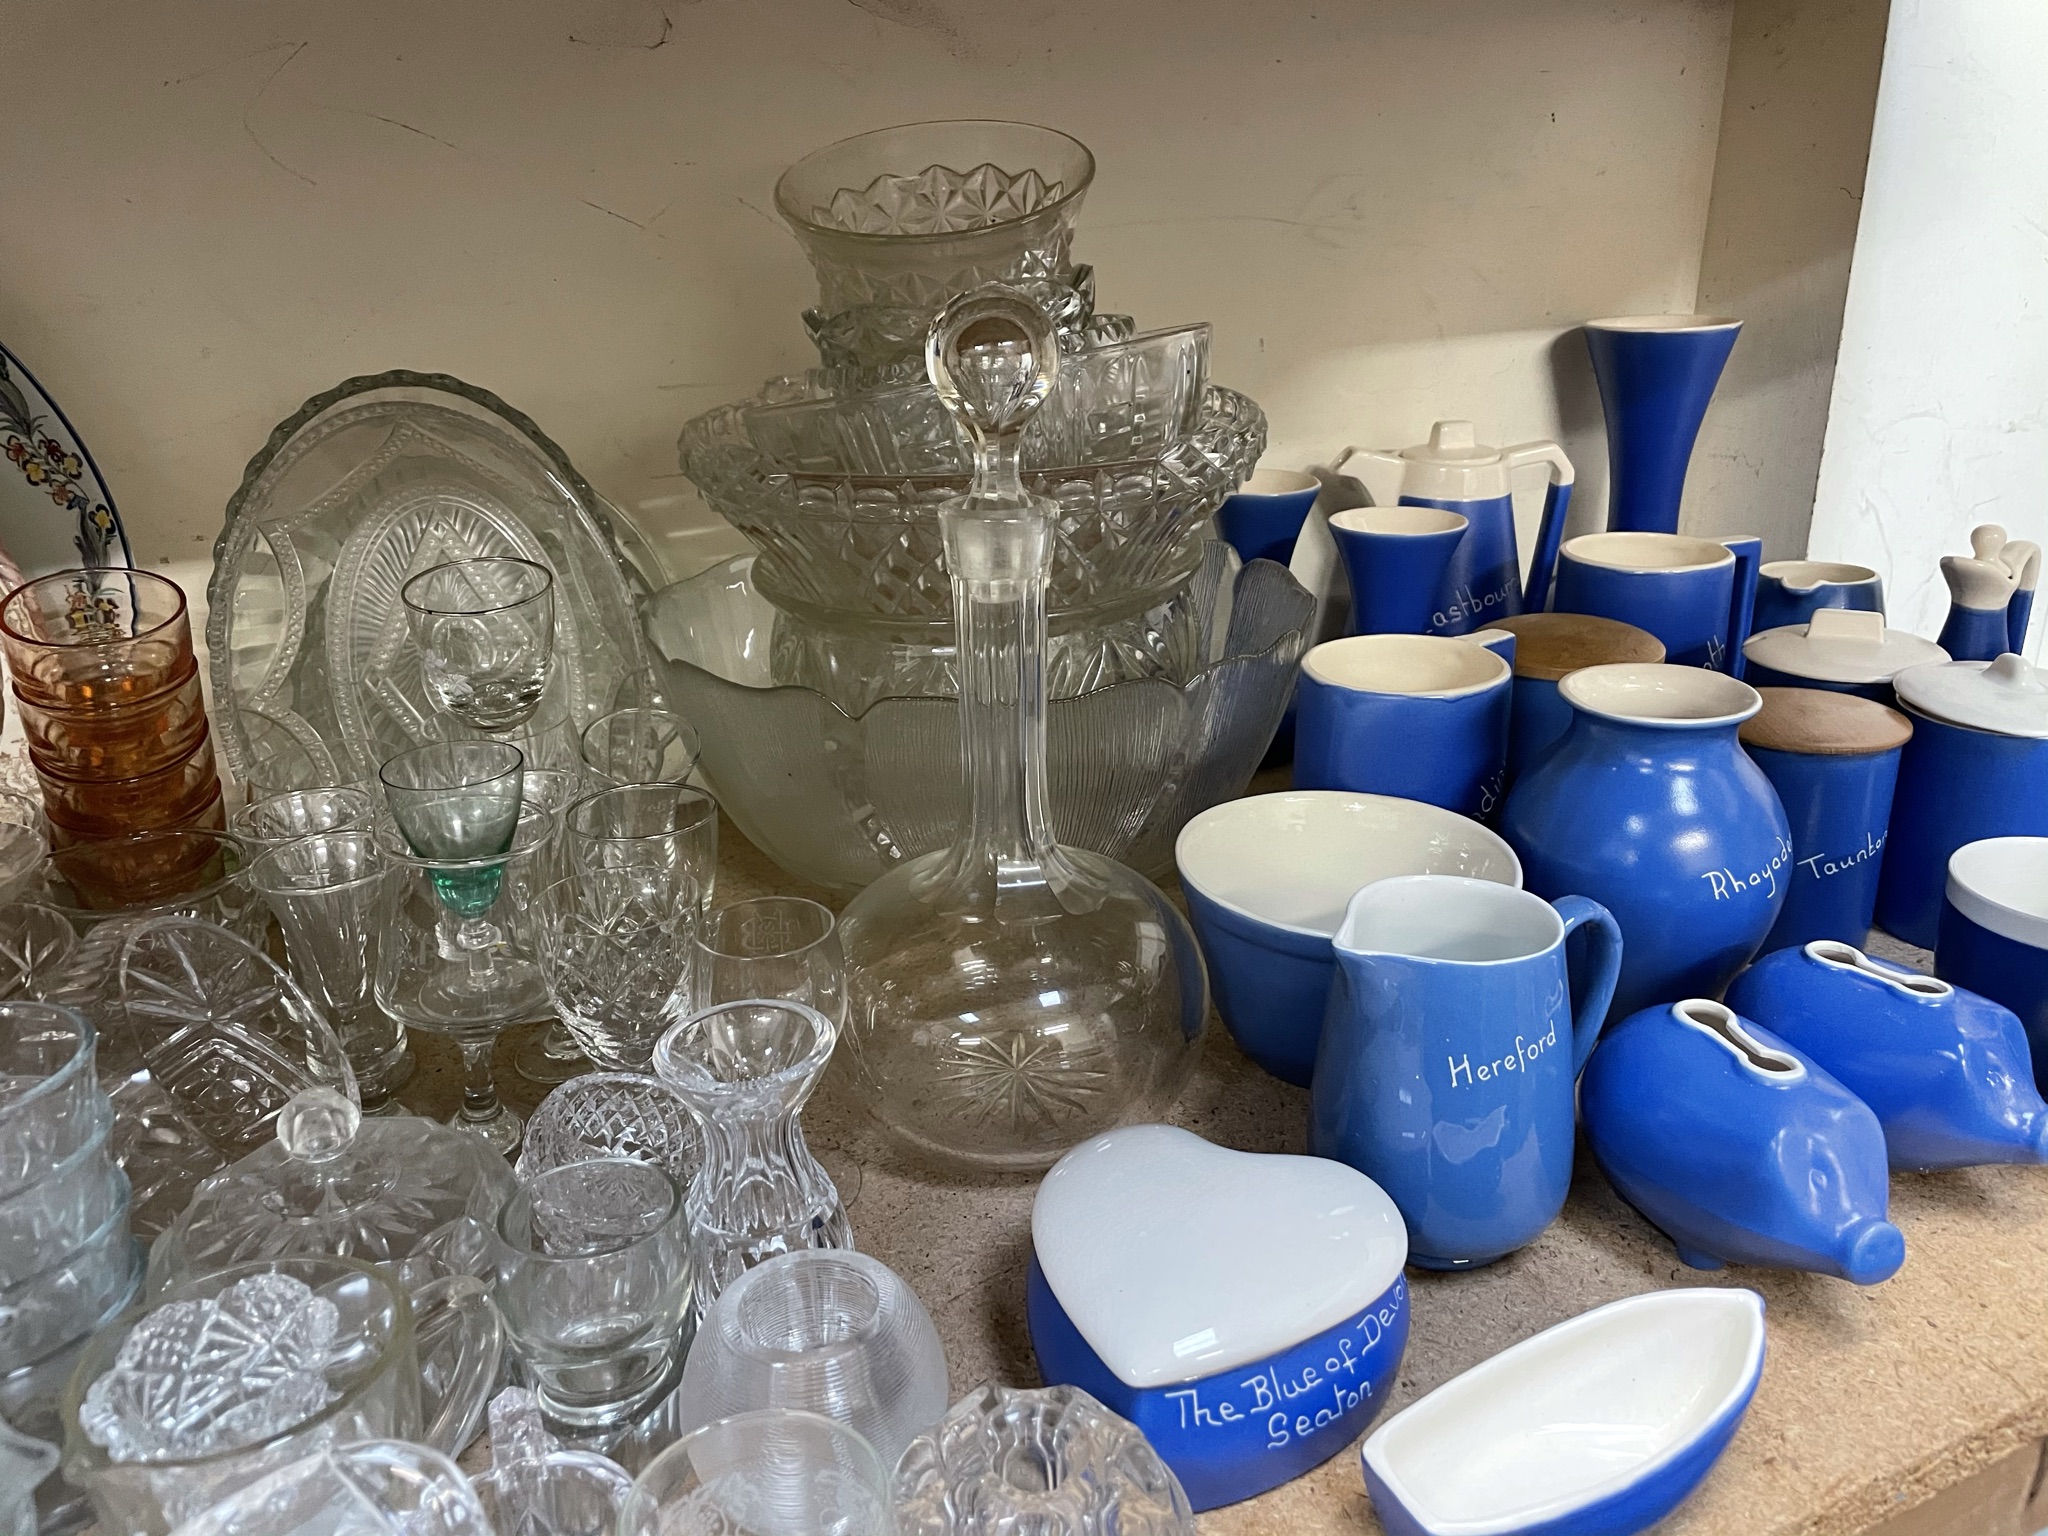 A collection of place name pottery together with glass bowls, drinking glasses, glass vases, - Image 4 of 4